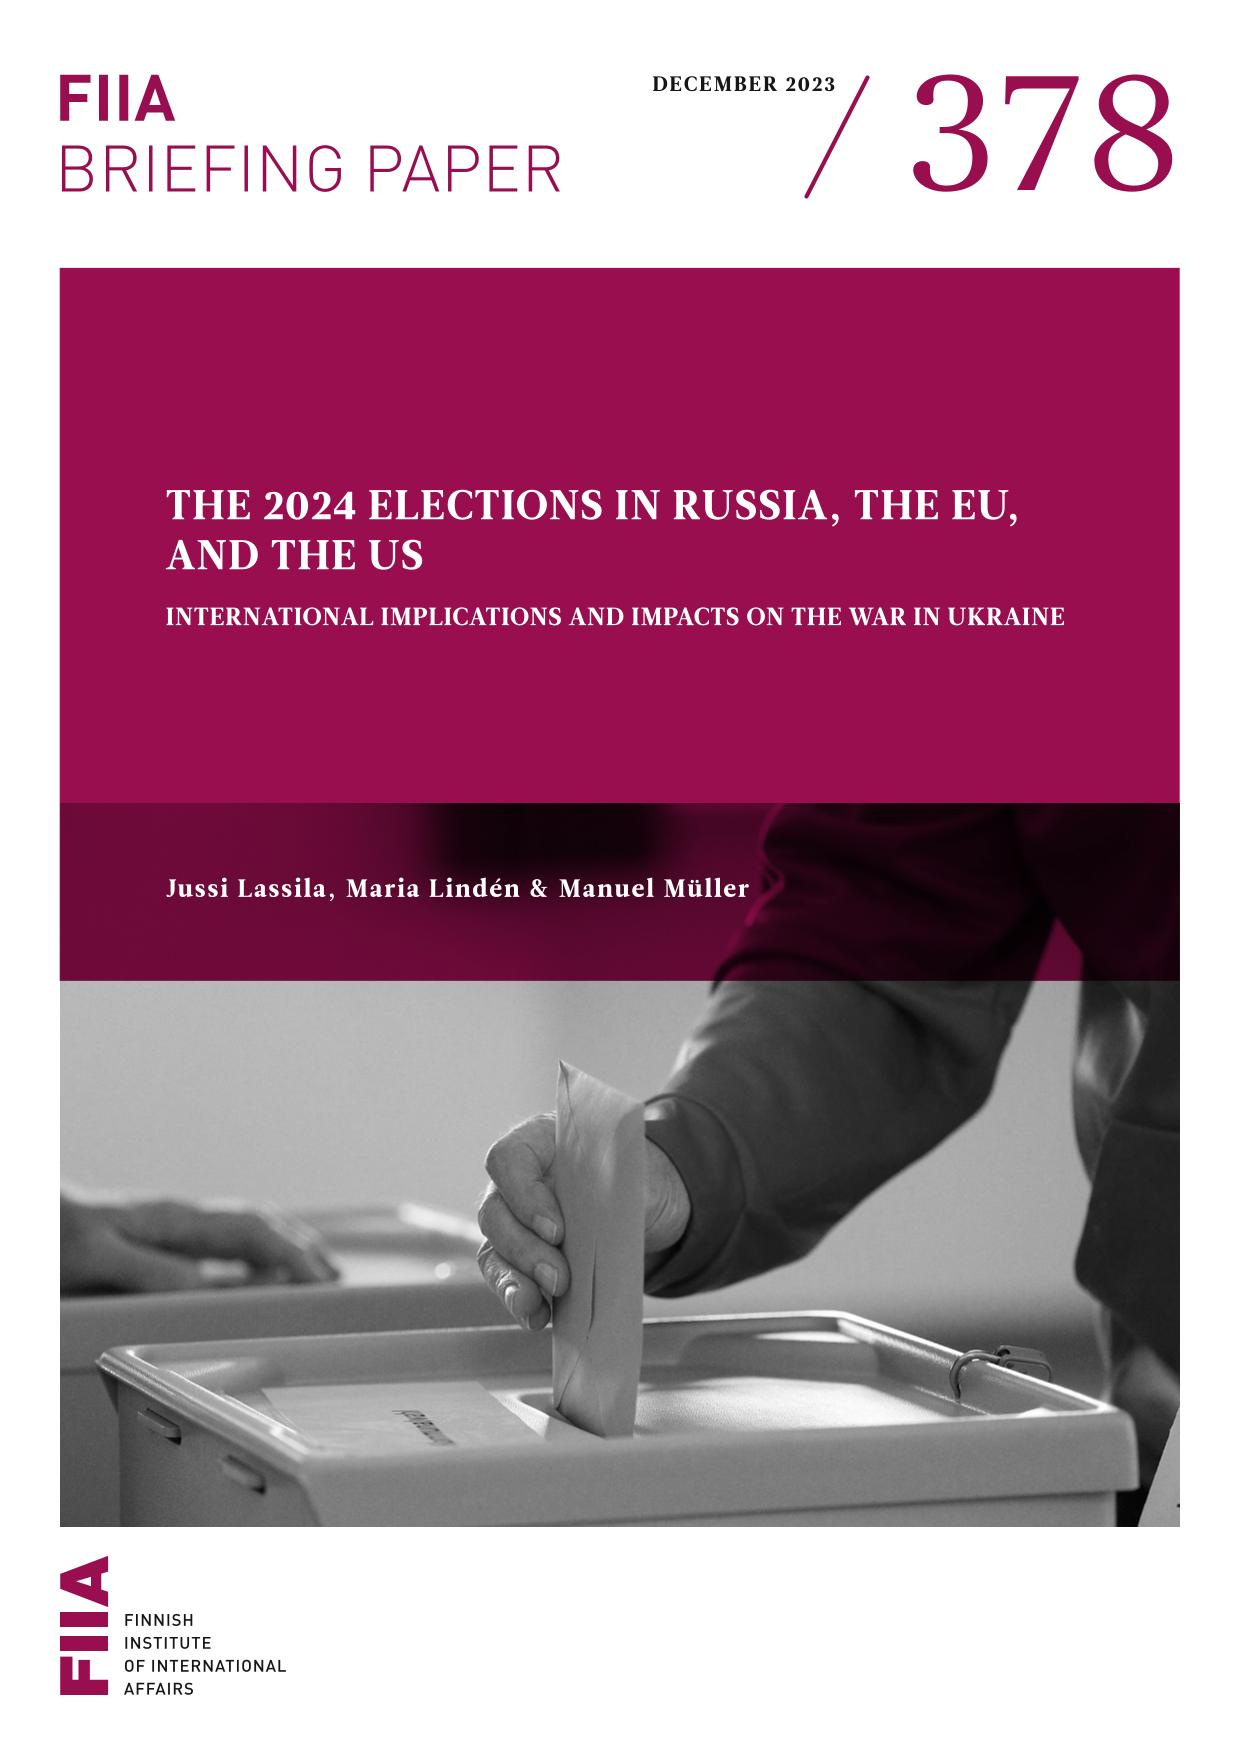 Cover of the FIIA Briefing Paper: The 2024 elections in Russia, the EU, and the US: International implications and impacts on the war in Ukraine